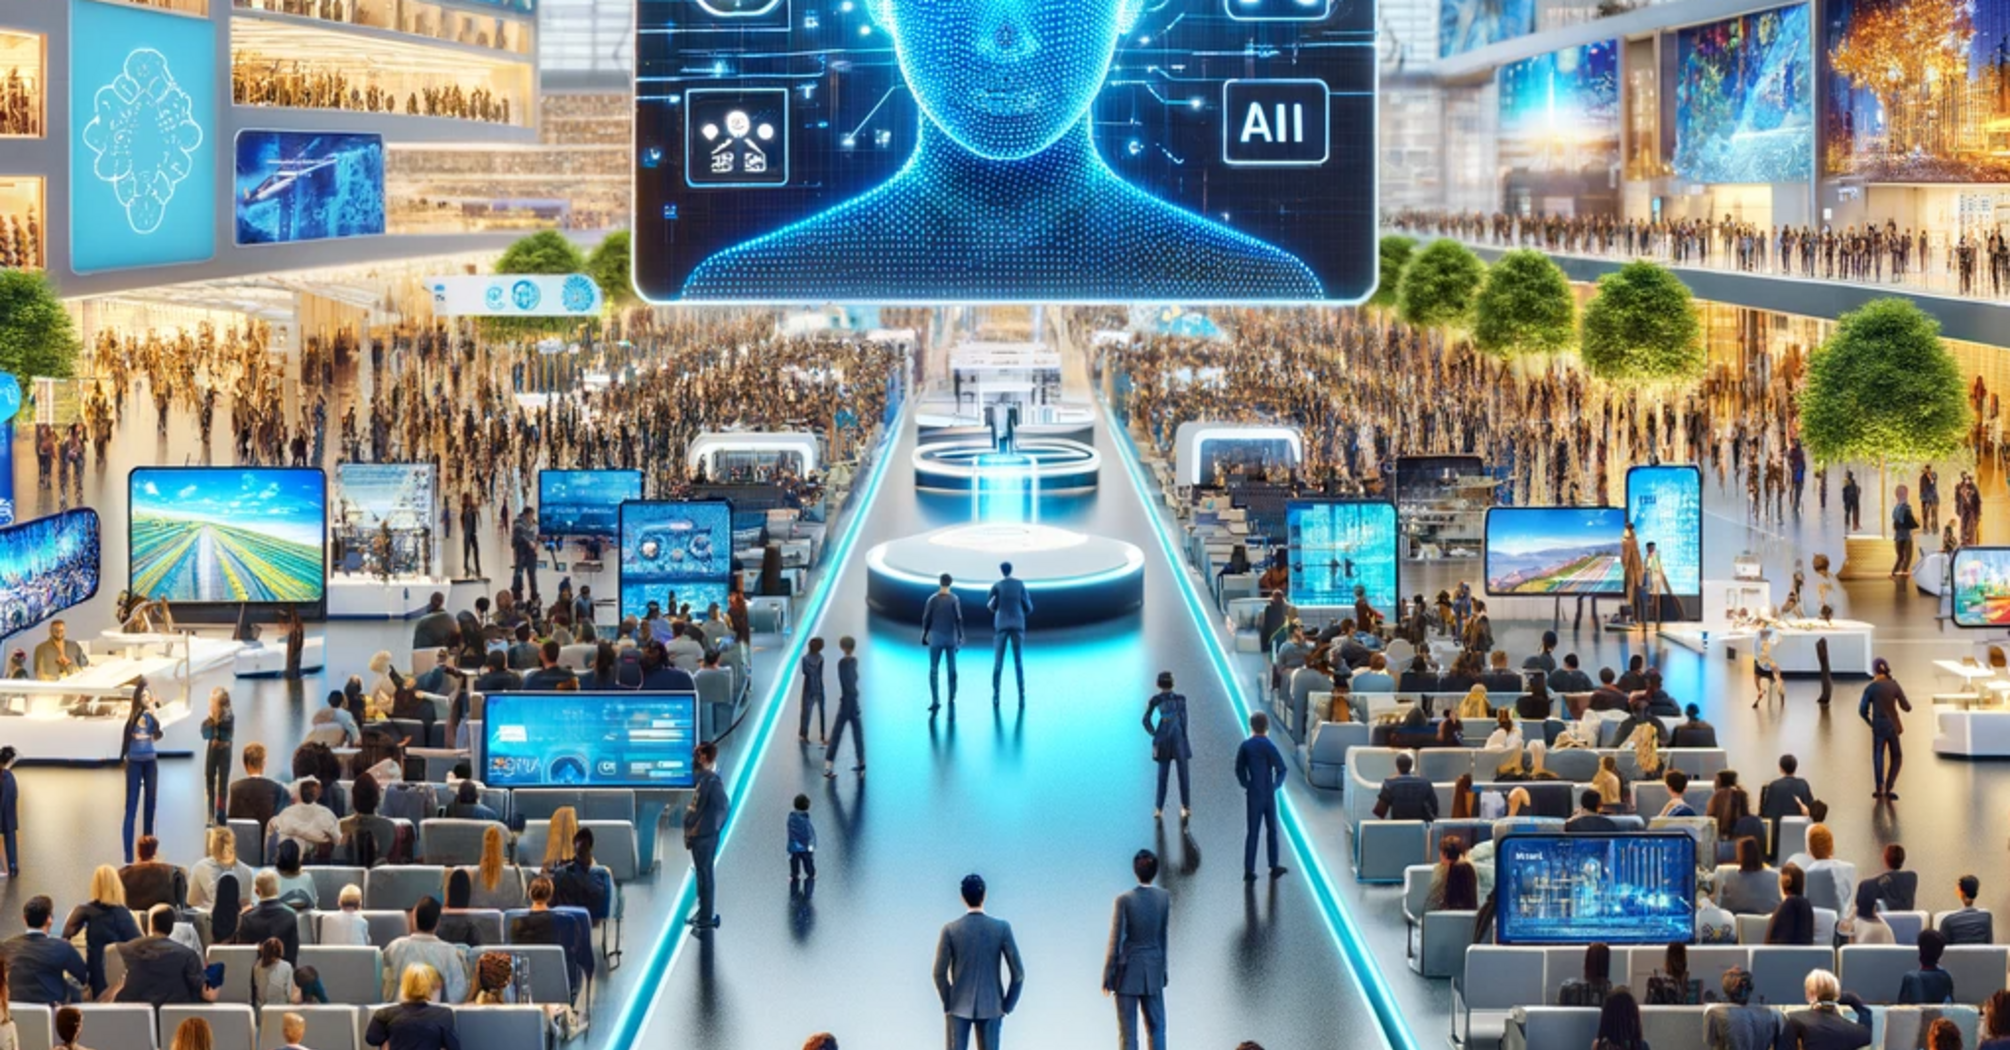 Modern convention hall with AI technology displays